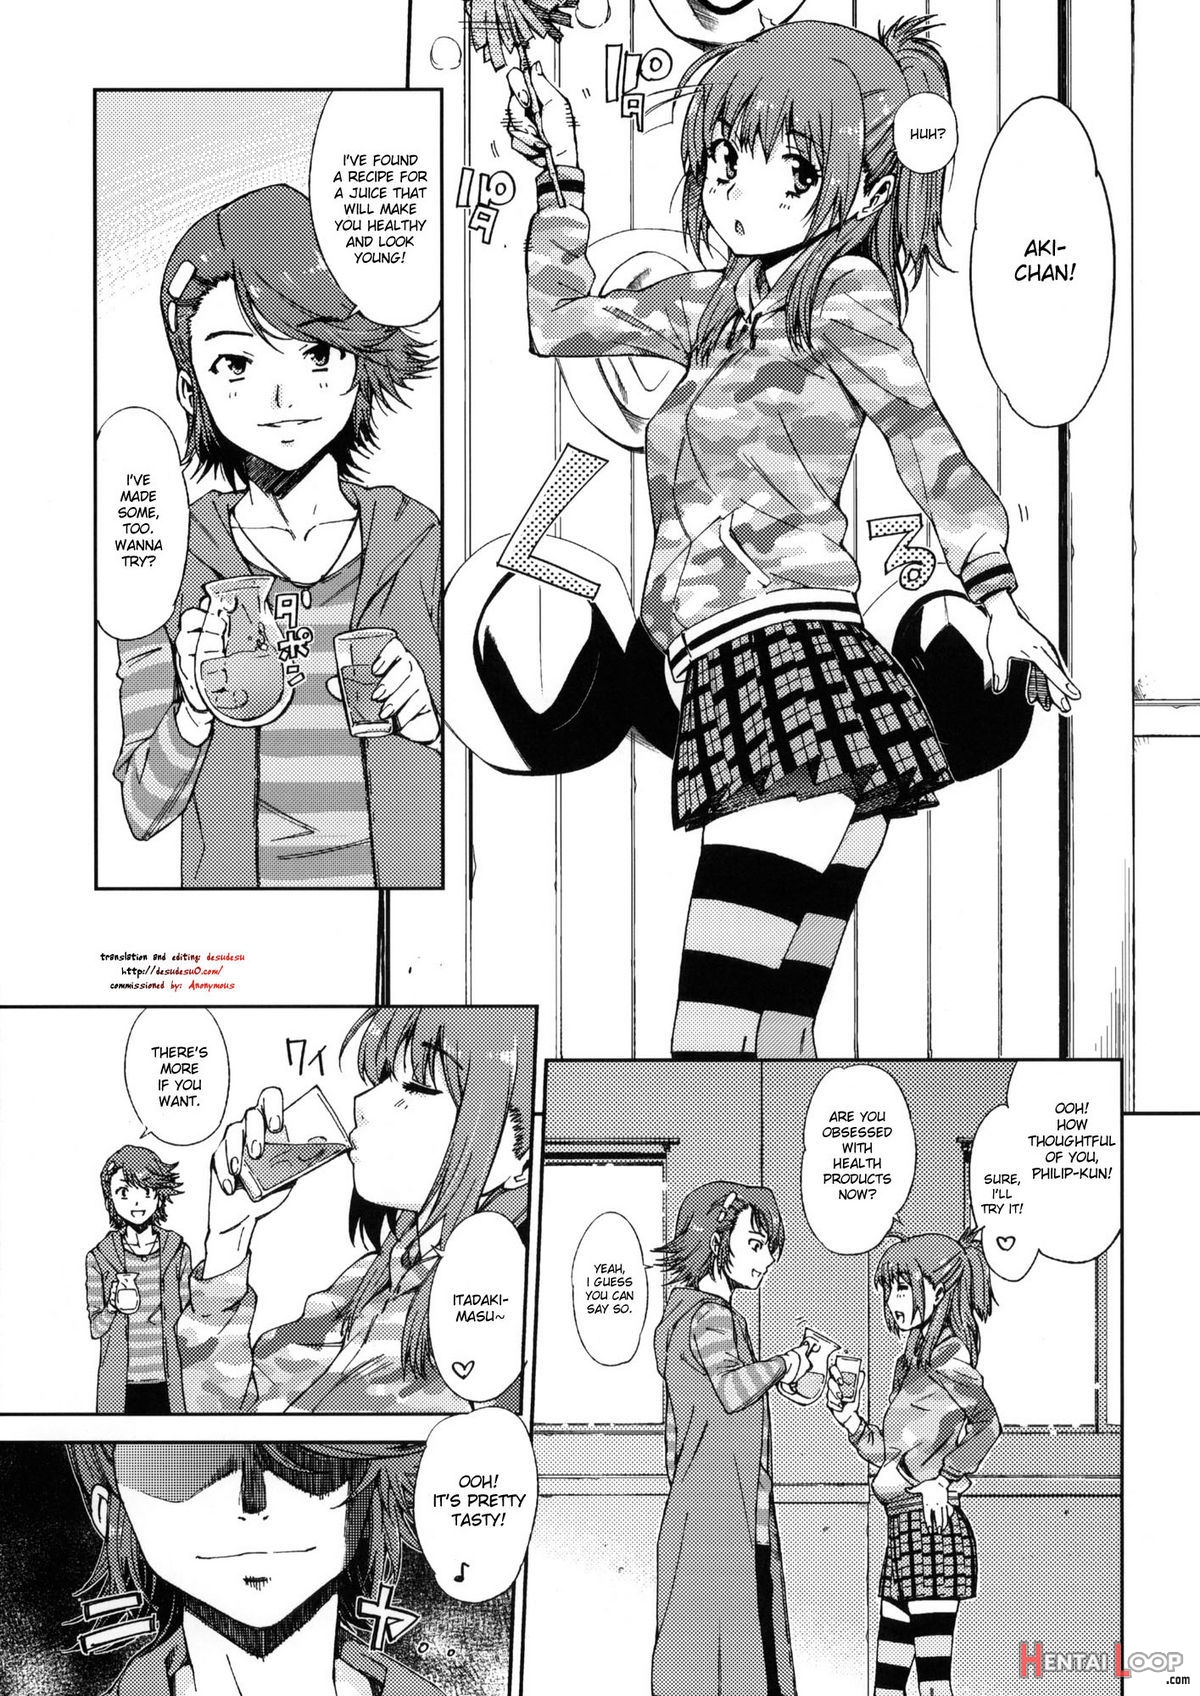 An Eromanga Thatâ€™s Double In Many Ways page 4